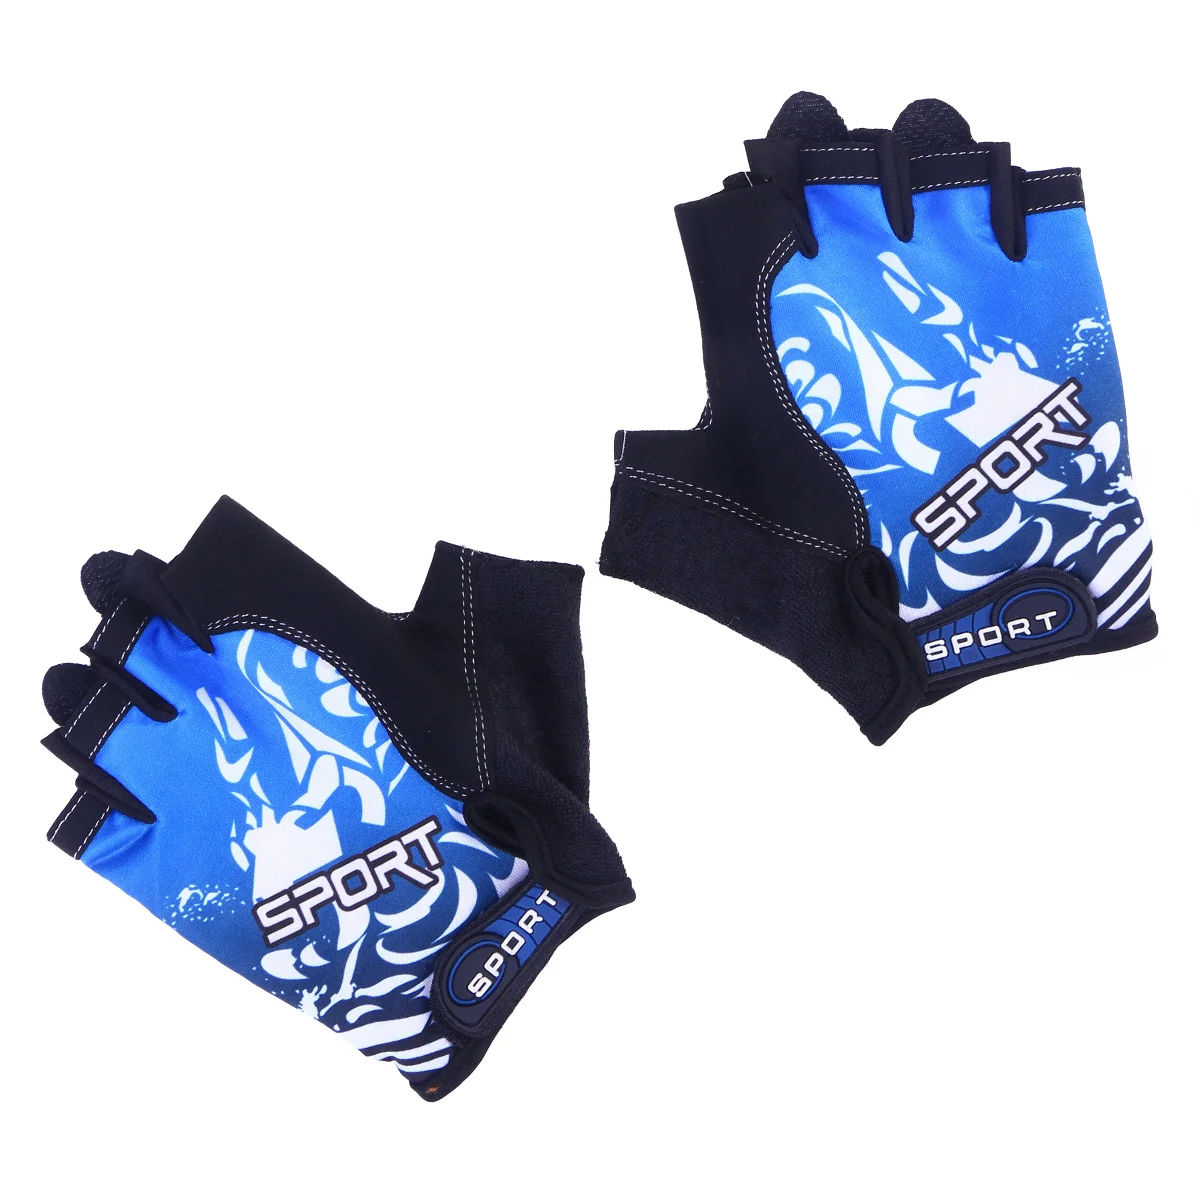 1 Pair Outdoor Sports Half Finger Gloves Non-Slip Breathable Workout Gloves for Cycling Climbing Fishing Riding Size M (Blue) fishermen single finger protector fishing gloves anti slip outdoor breathable elastic protector gloves for lure fishing